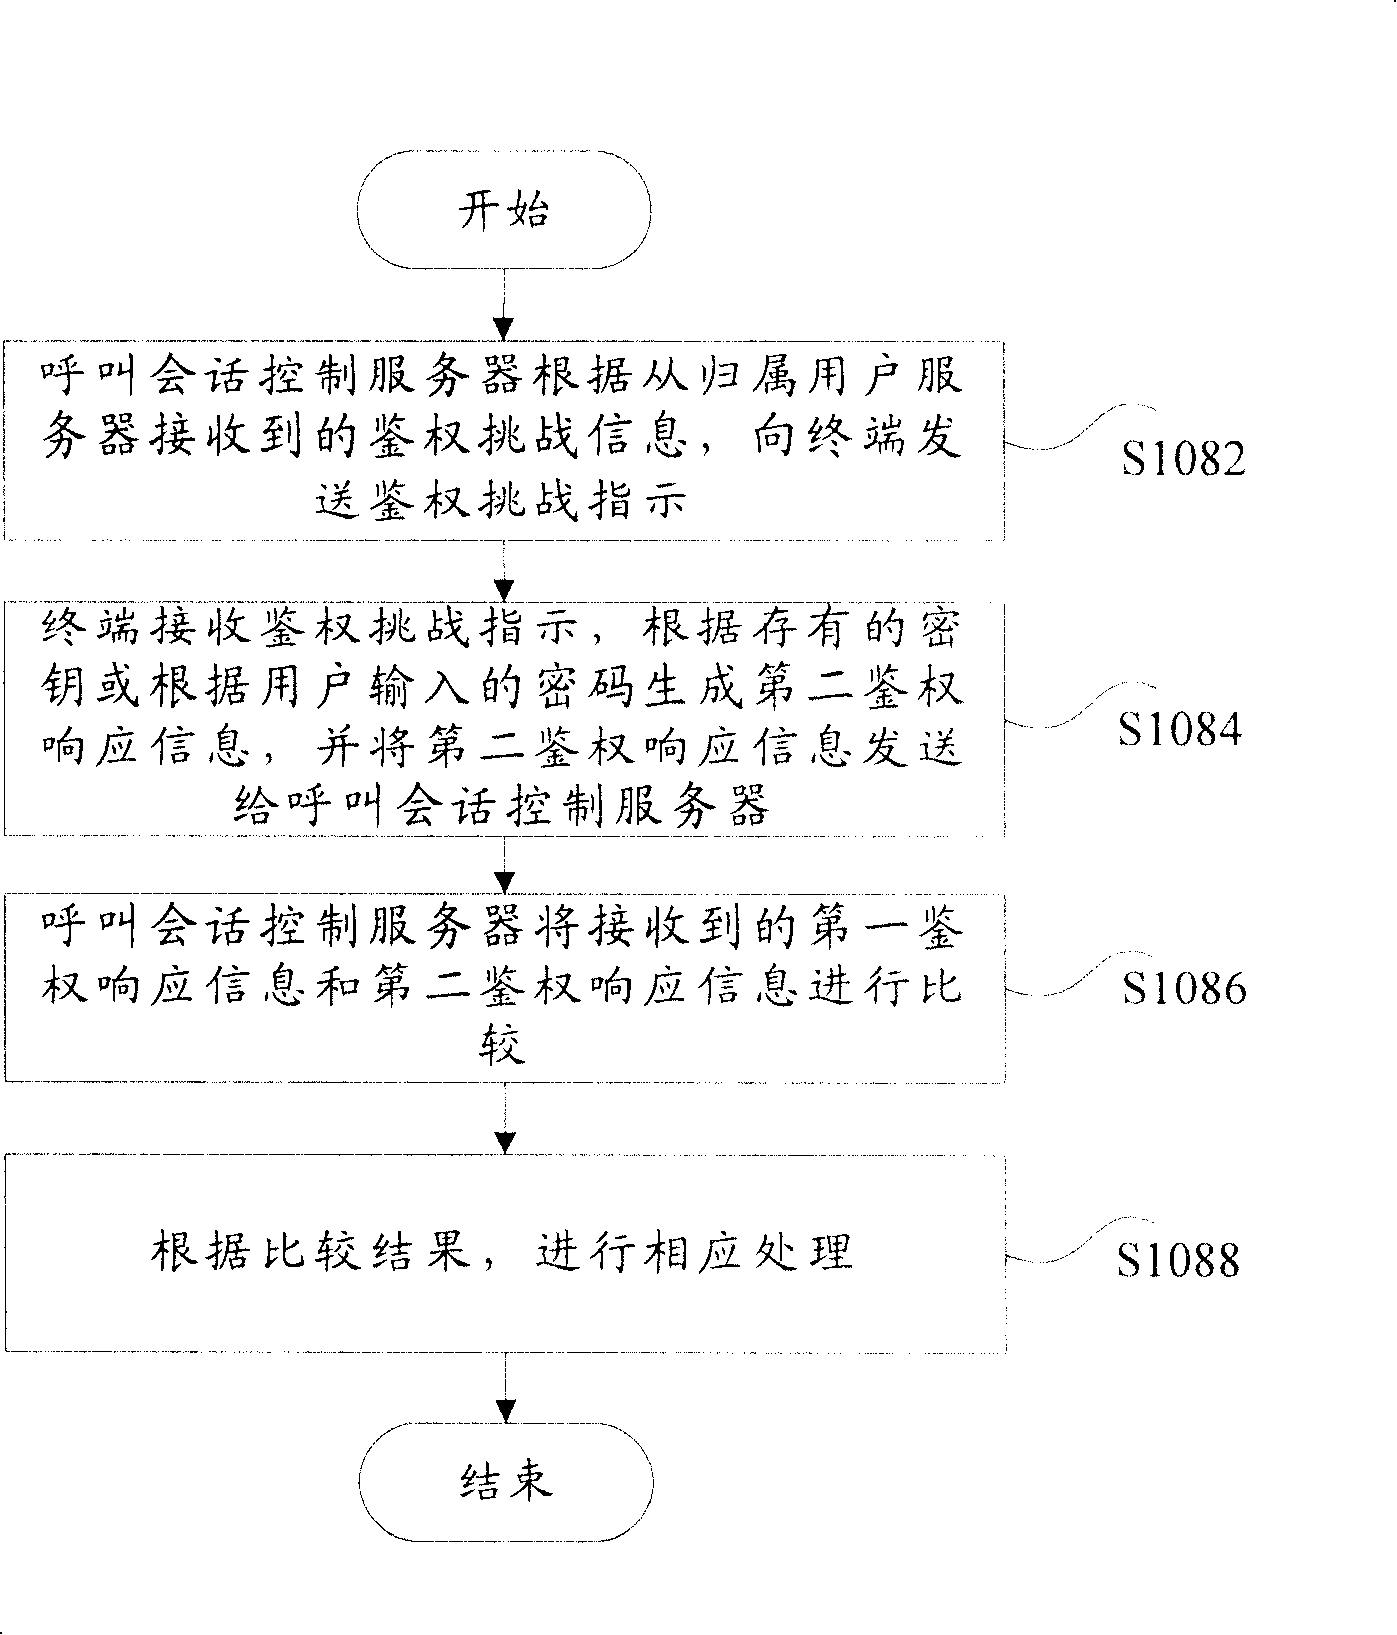 Authentication device for providing authentication to users accessing by terminal